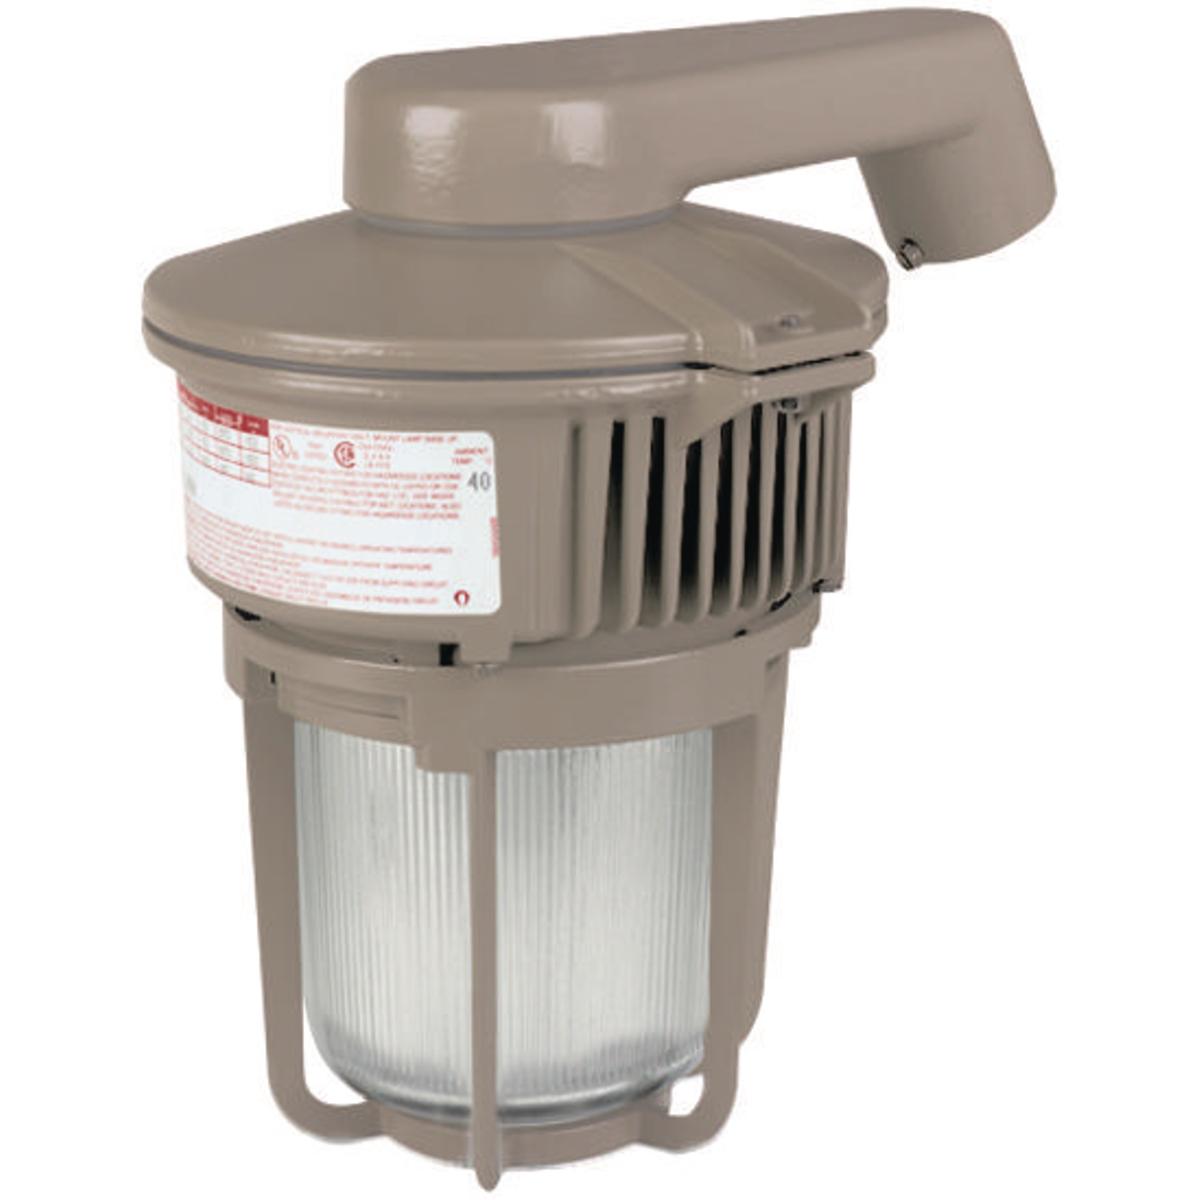 Hubbell MBL501-GD4 50W HPS Fluorescent 120V  1-1/4" "Stanchion Mount  ; Ballast tank and splice box – corrosion resistant copper-free aluminum alloy ; Baked powder epoxy/polyester finish, electrostatically applied for complete, uniform corrosion protection ; All external ha